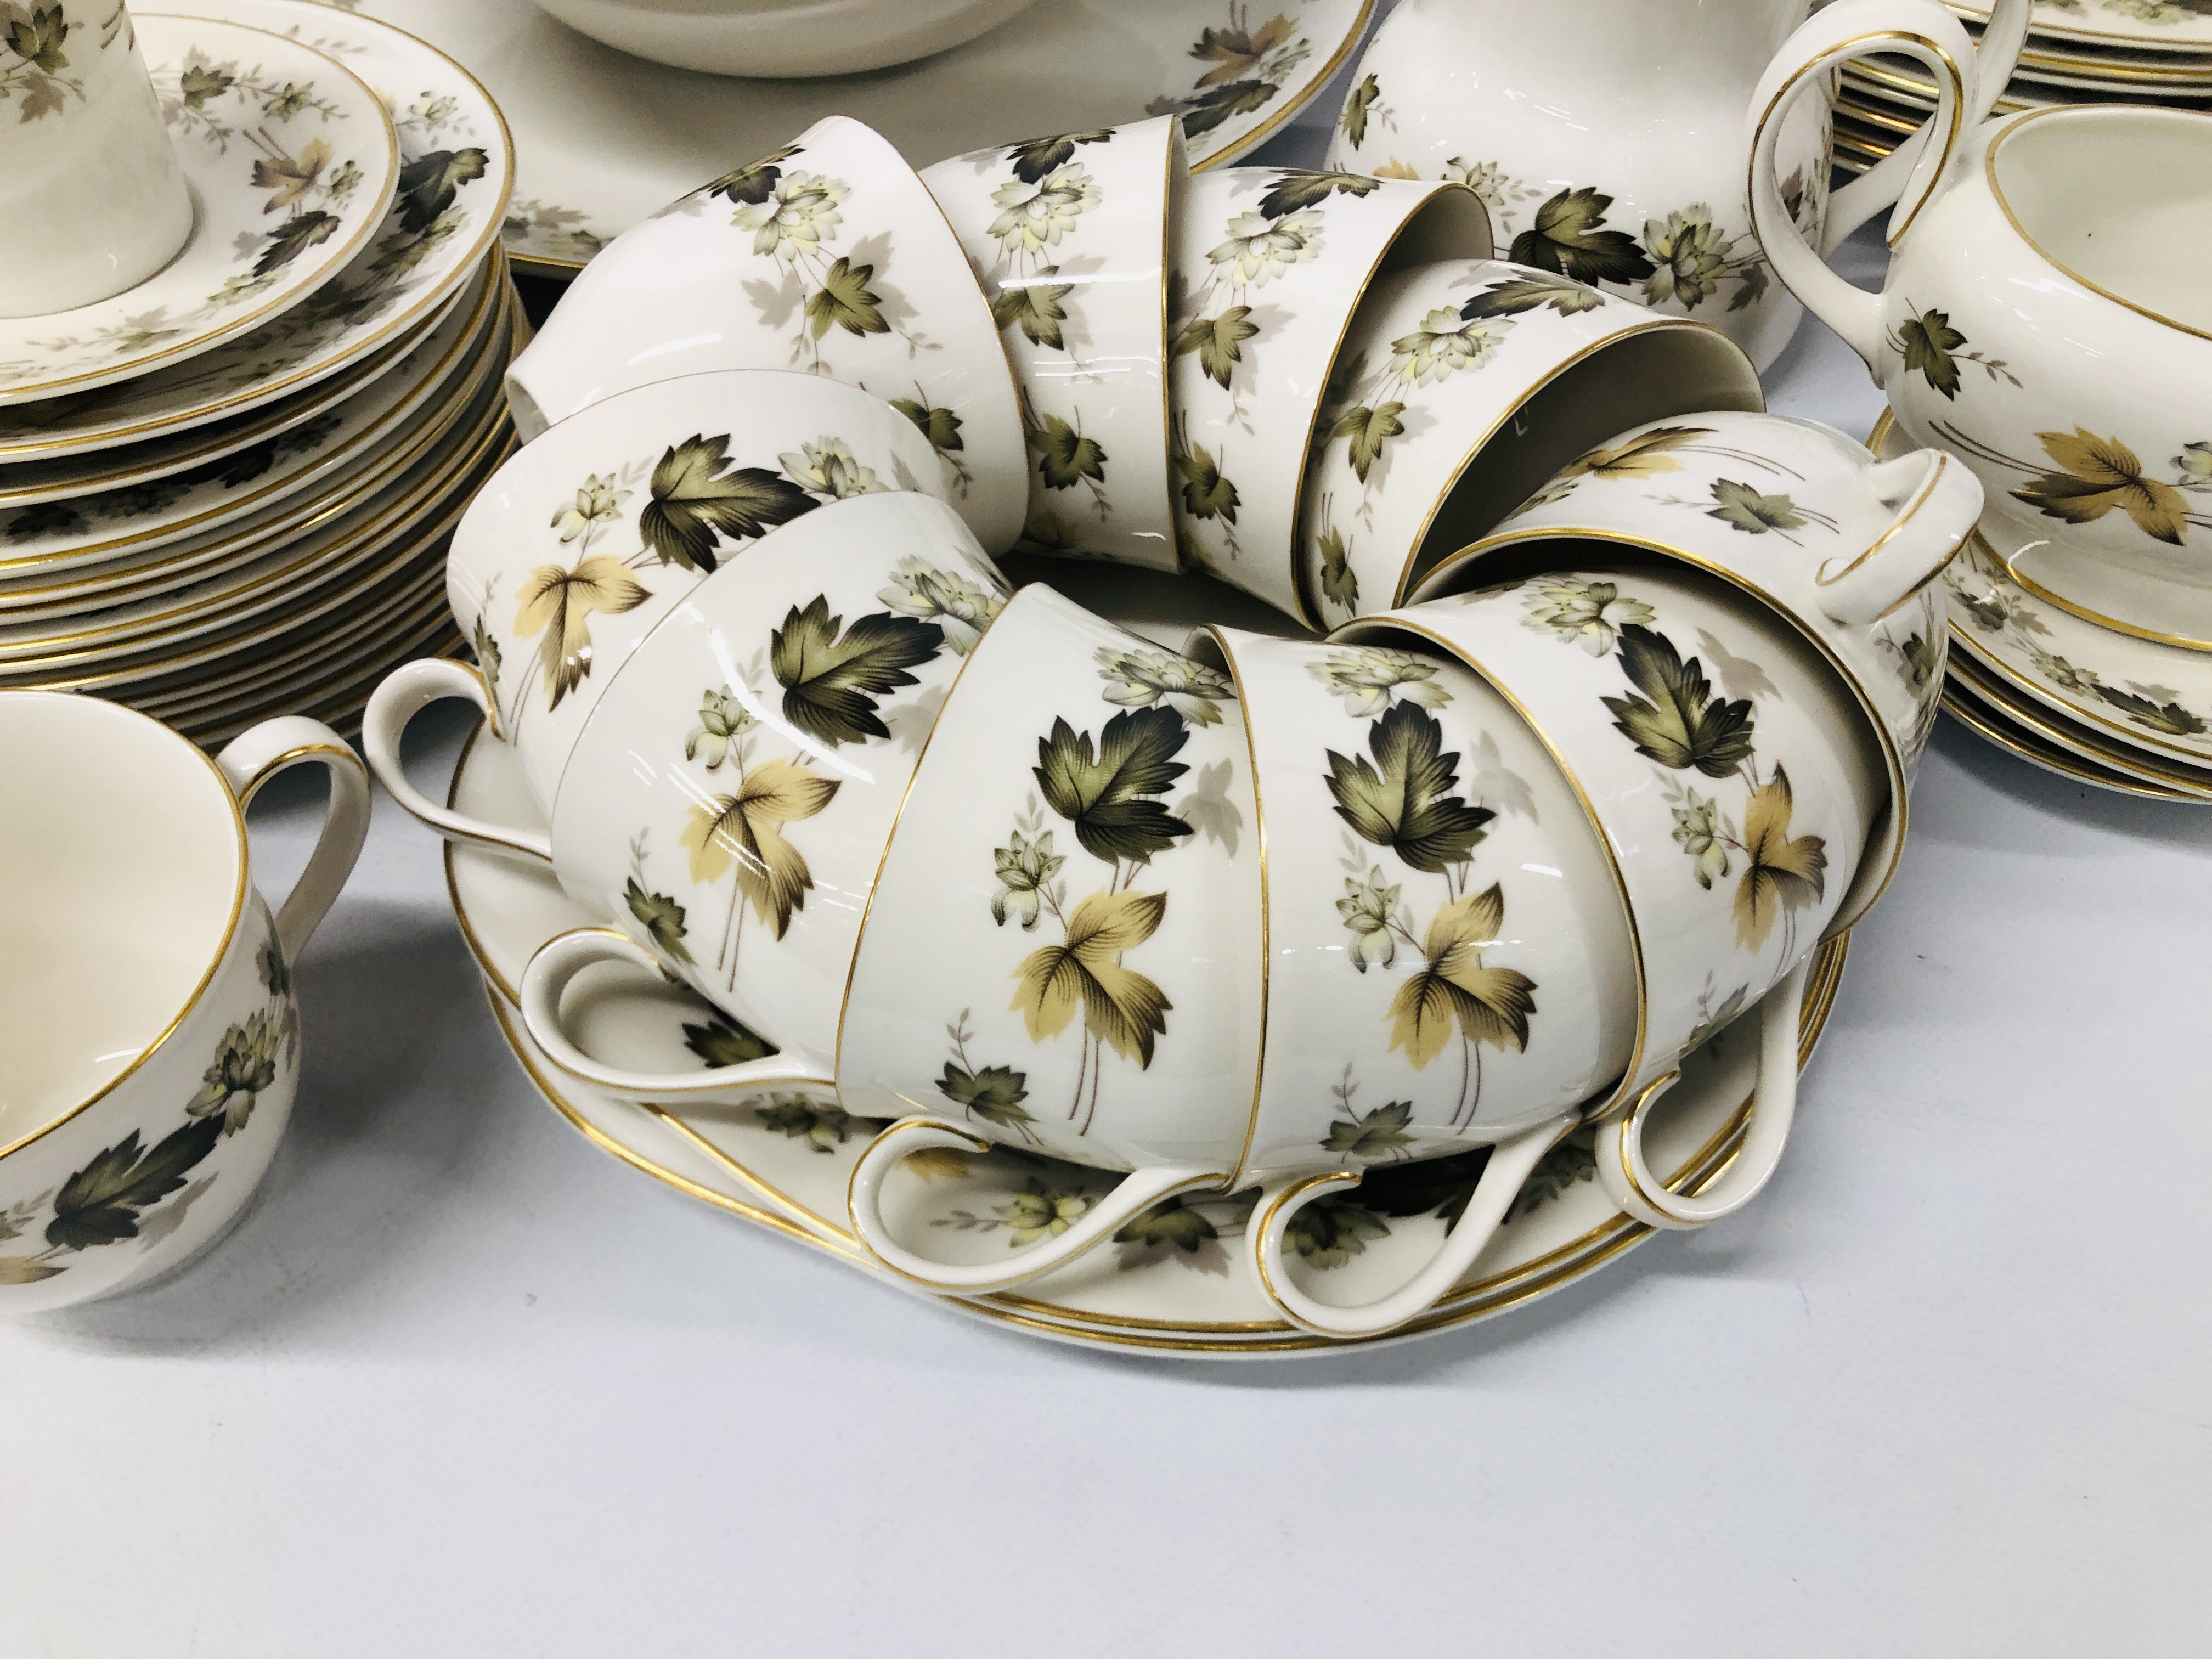 COLLECTION OF ROYAL DOULTON "LARCHMONT" TC1019 TEA AND DINNER WARE (APPROX. - Image 2 of 9